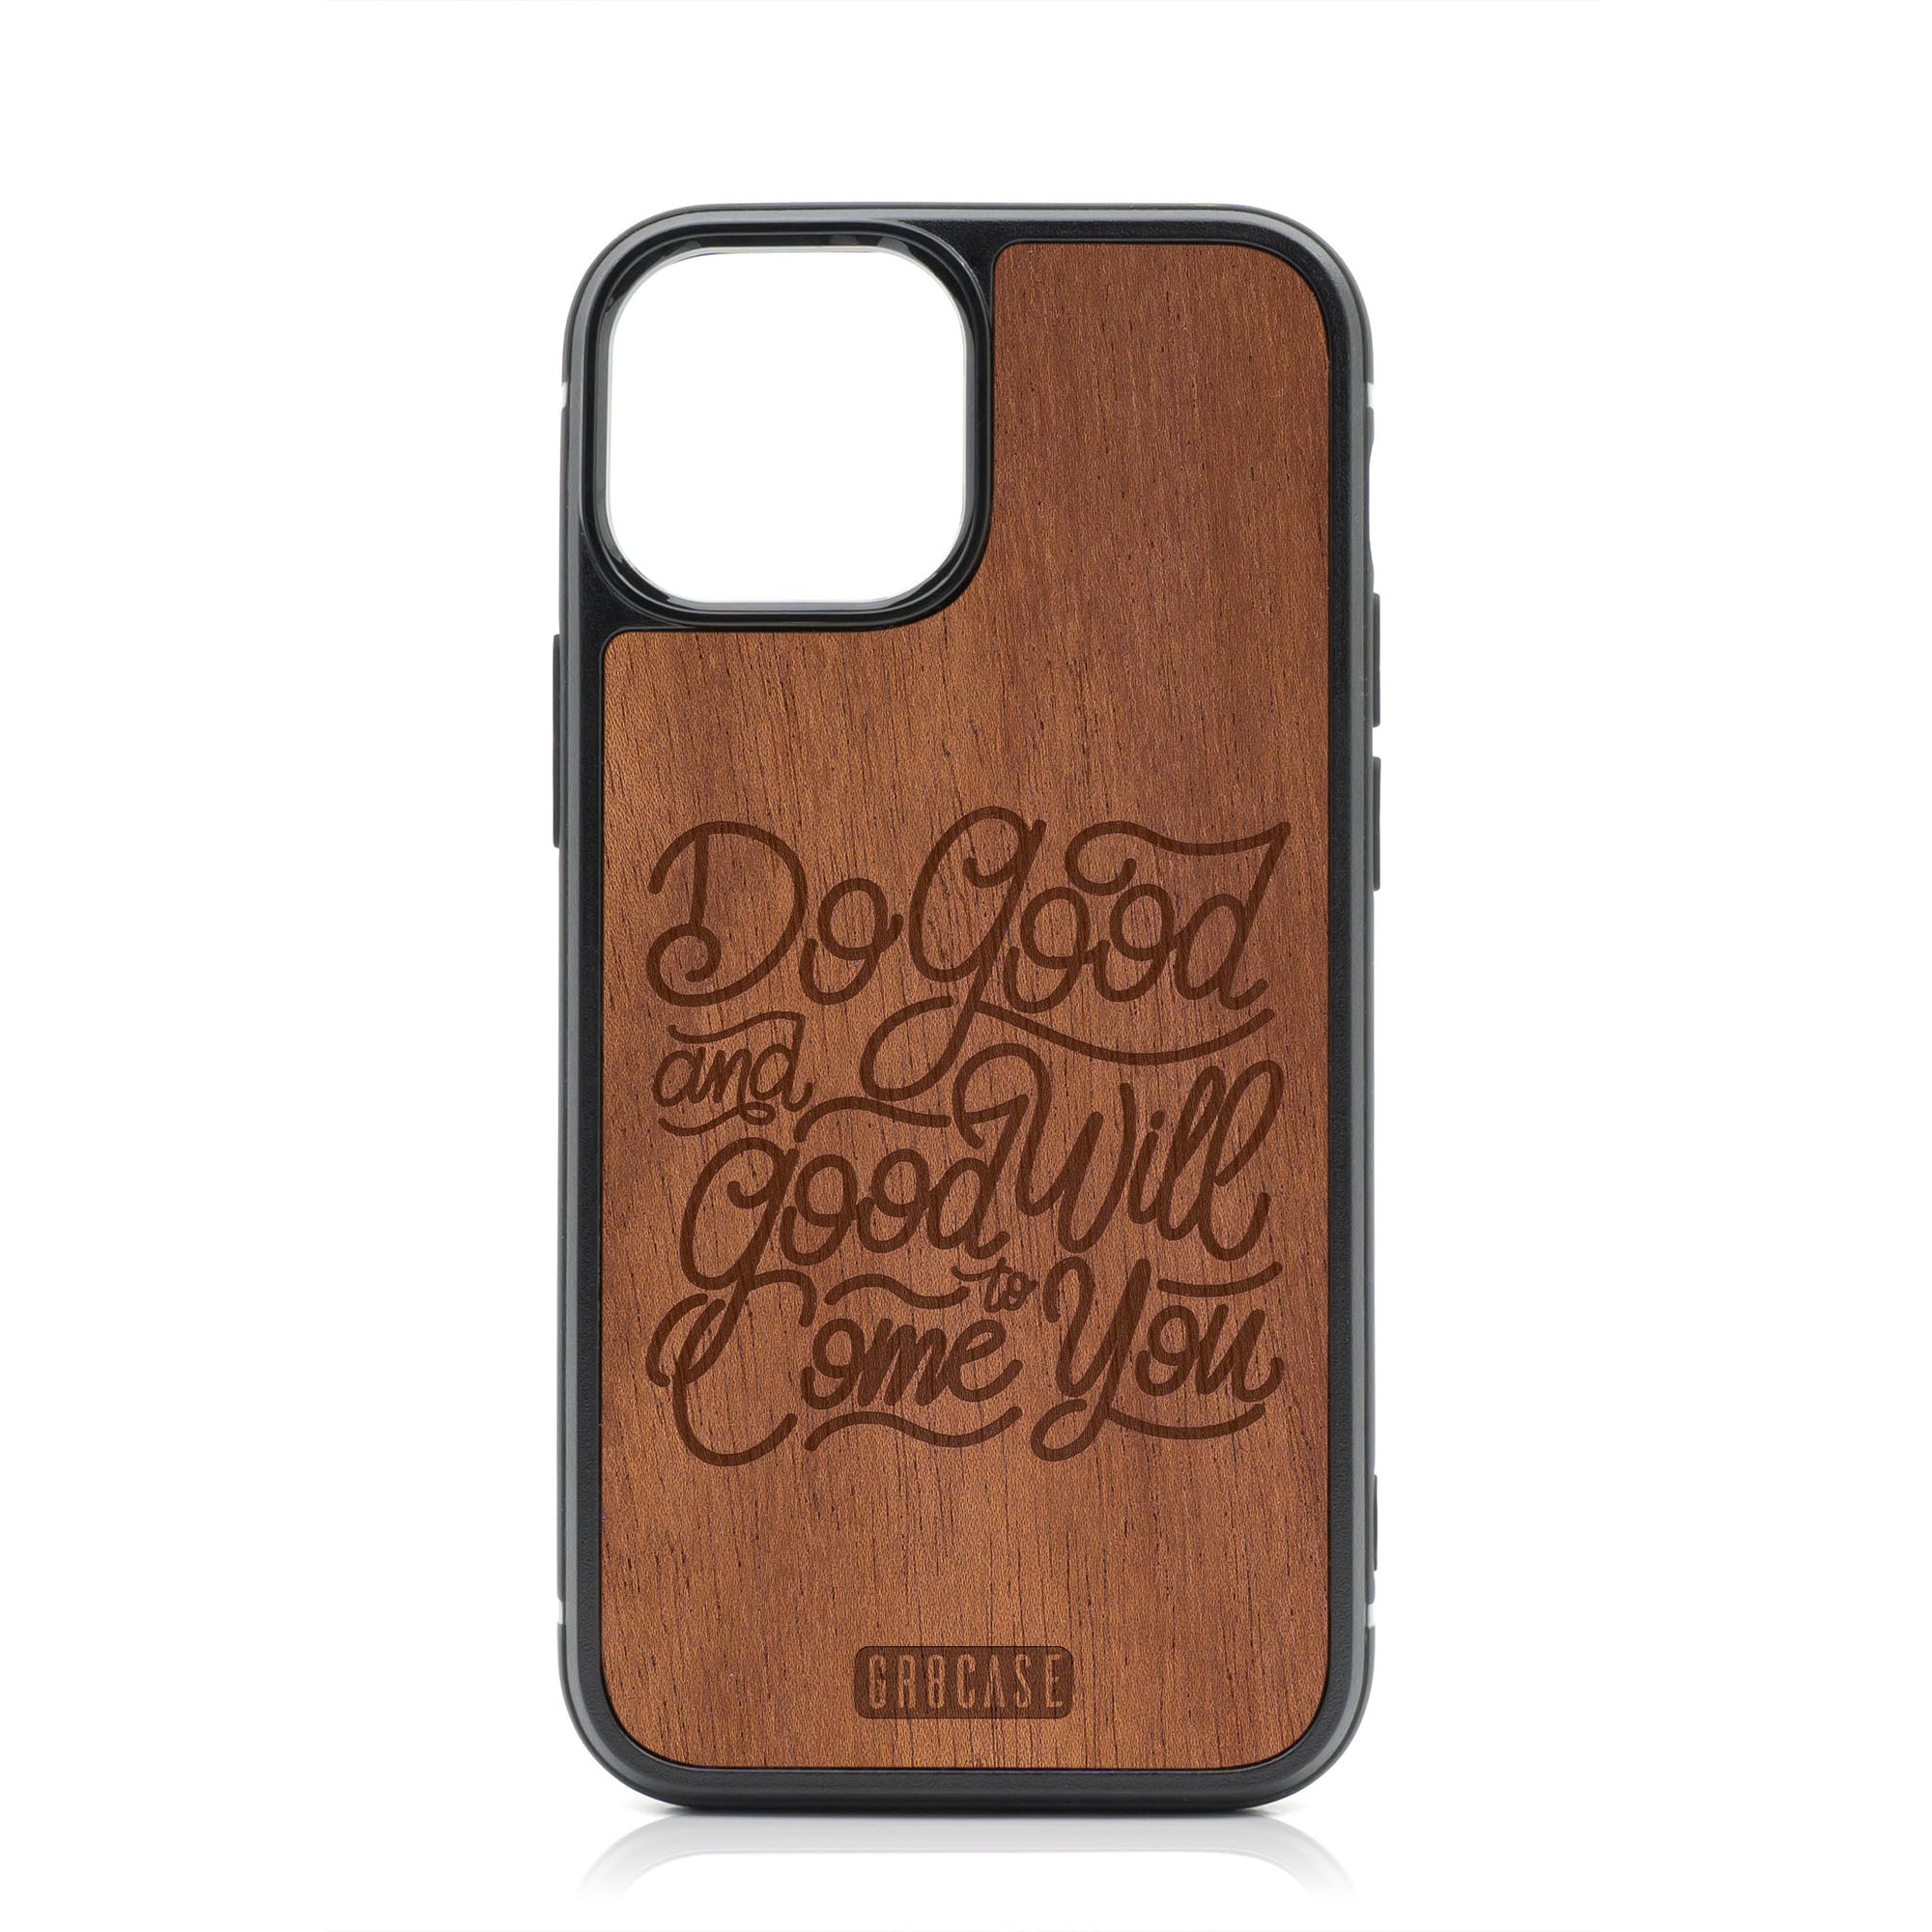 Do Good And Good Will Come To You Design Wood Case For iPhone 13 Mini